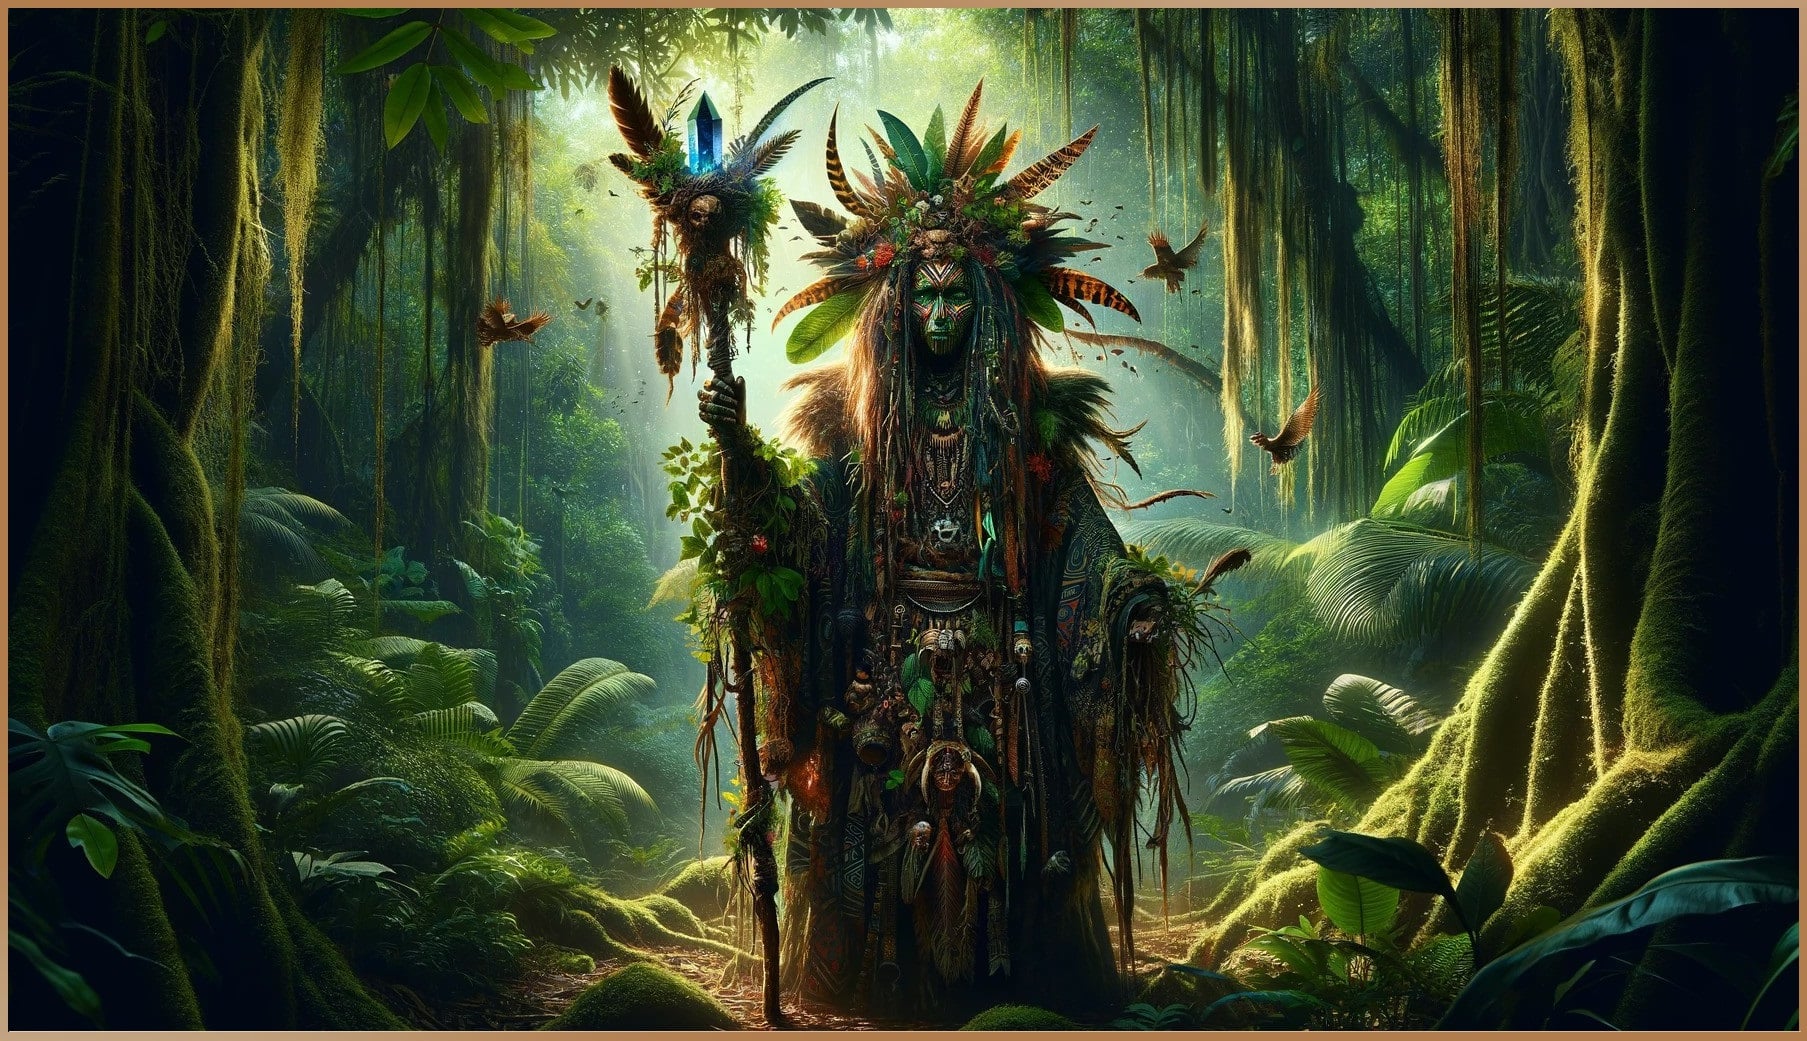 A tribal wizard adorned with intricate attire and carrying symbols of power stands amidst a rainforest, embodying ancient wisdom and a connection to the supernatural, suggestive of human potential for ESP and mental prowess.